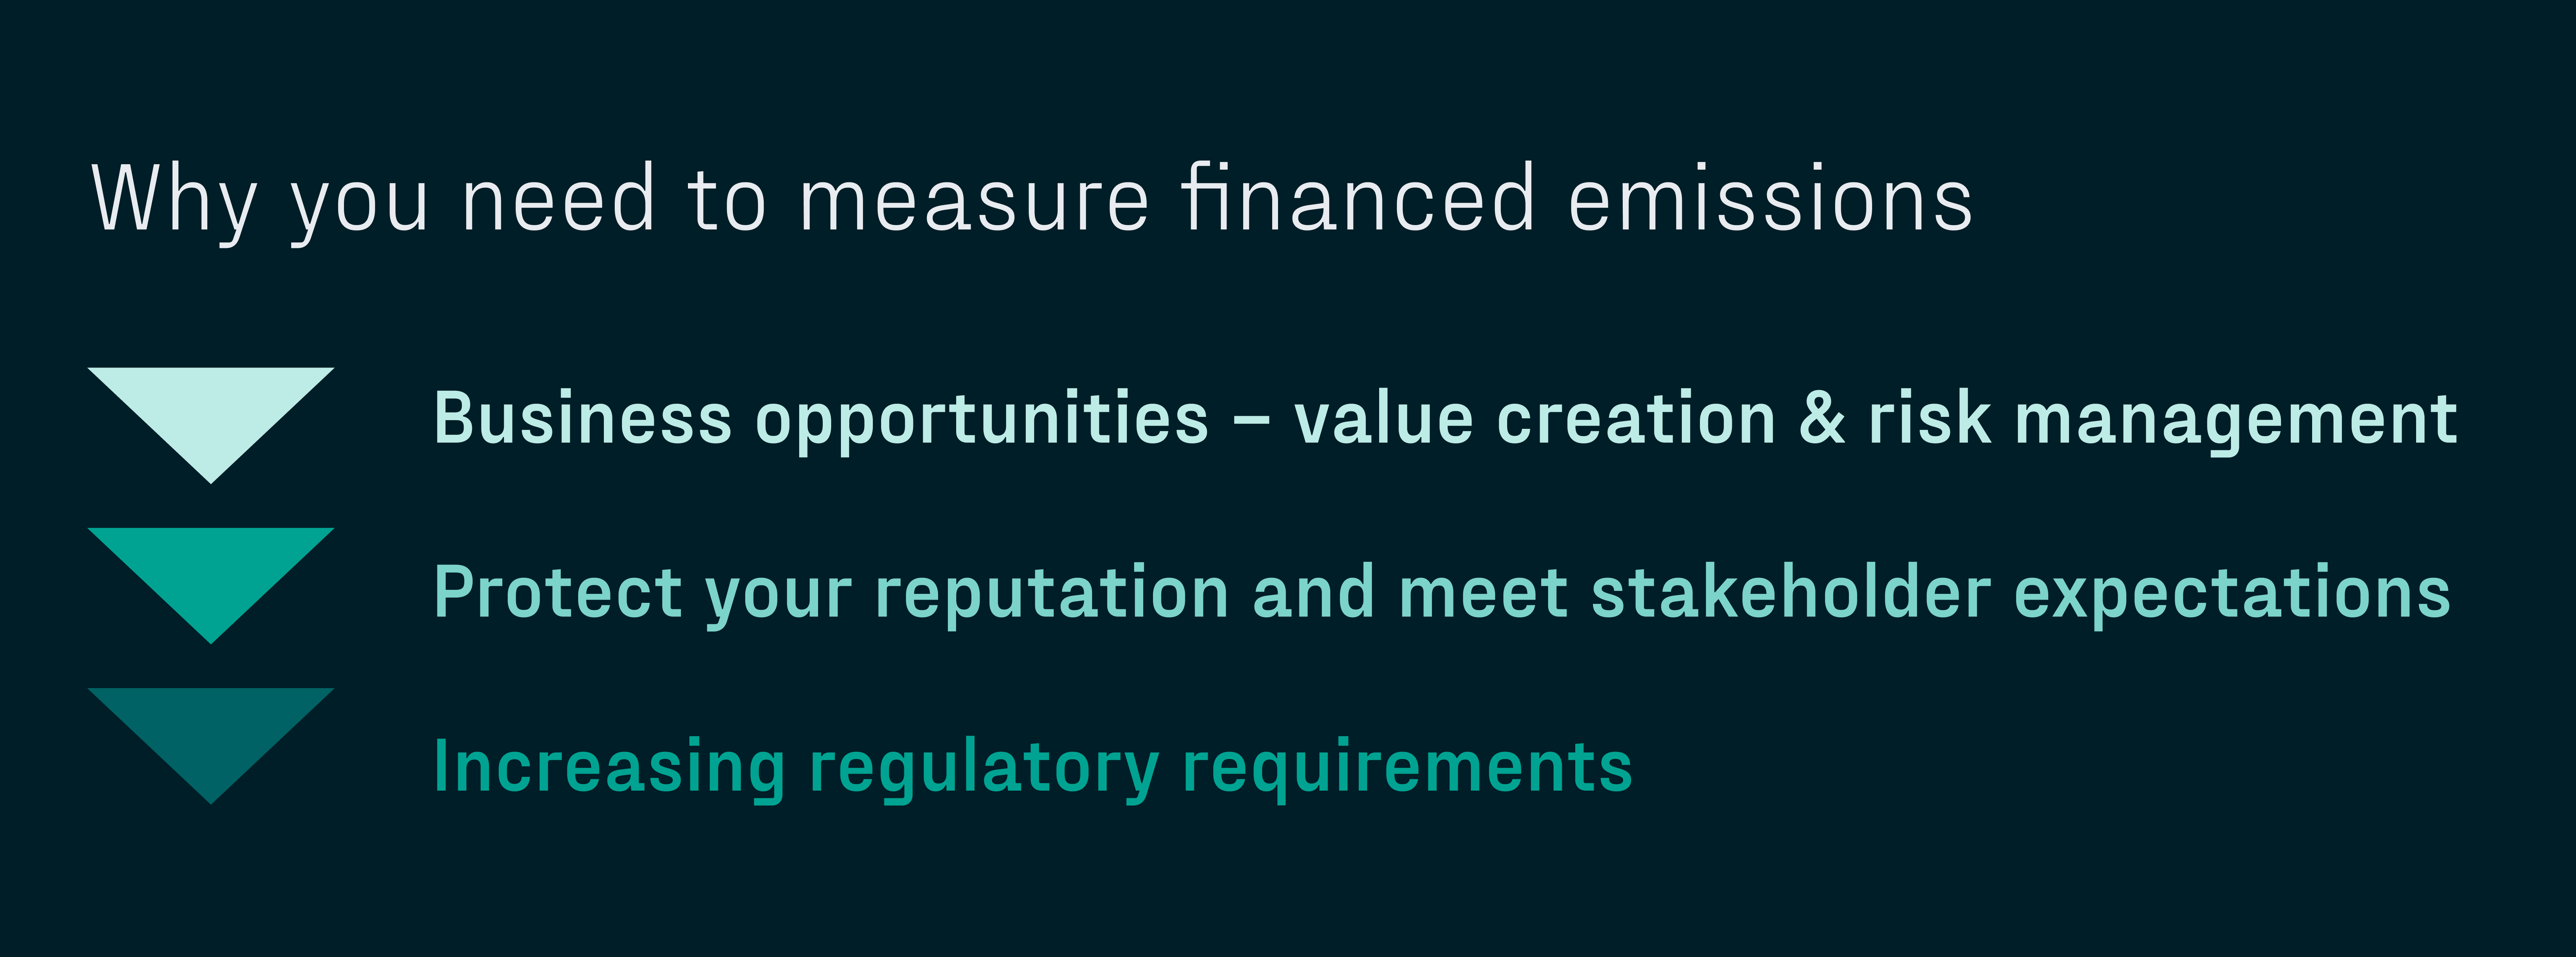 Why you need to measure financed emissions